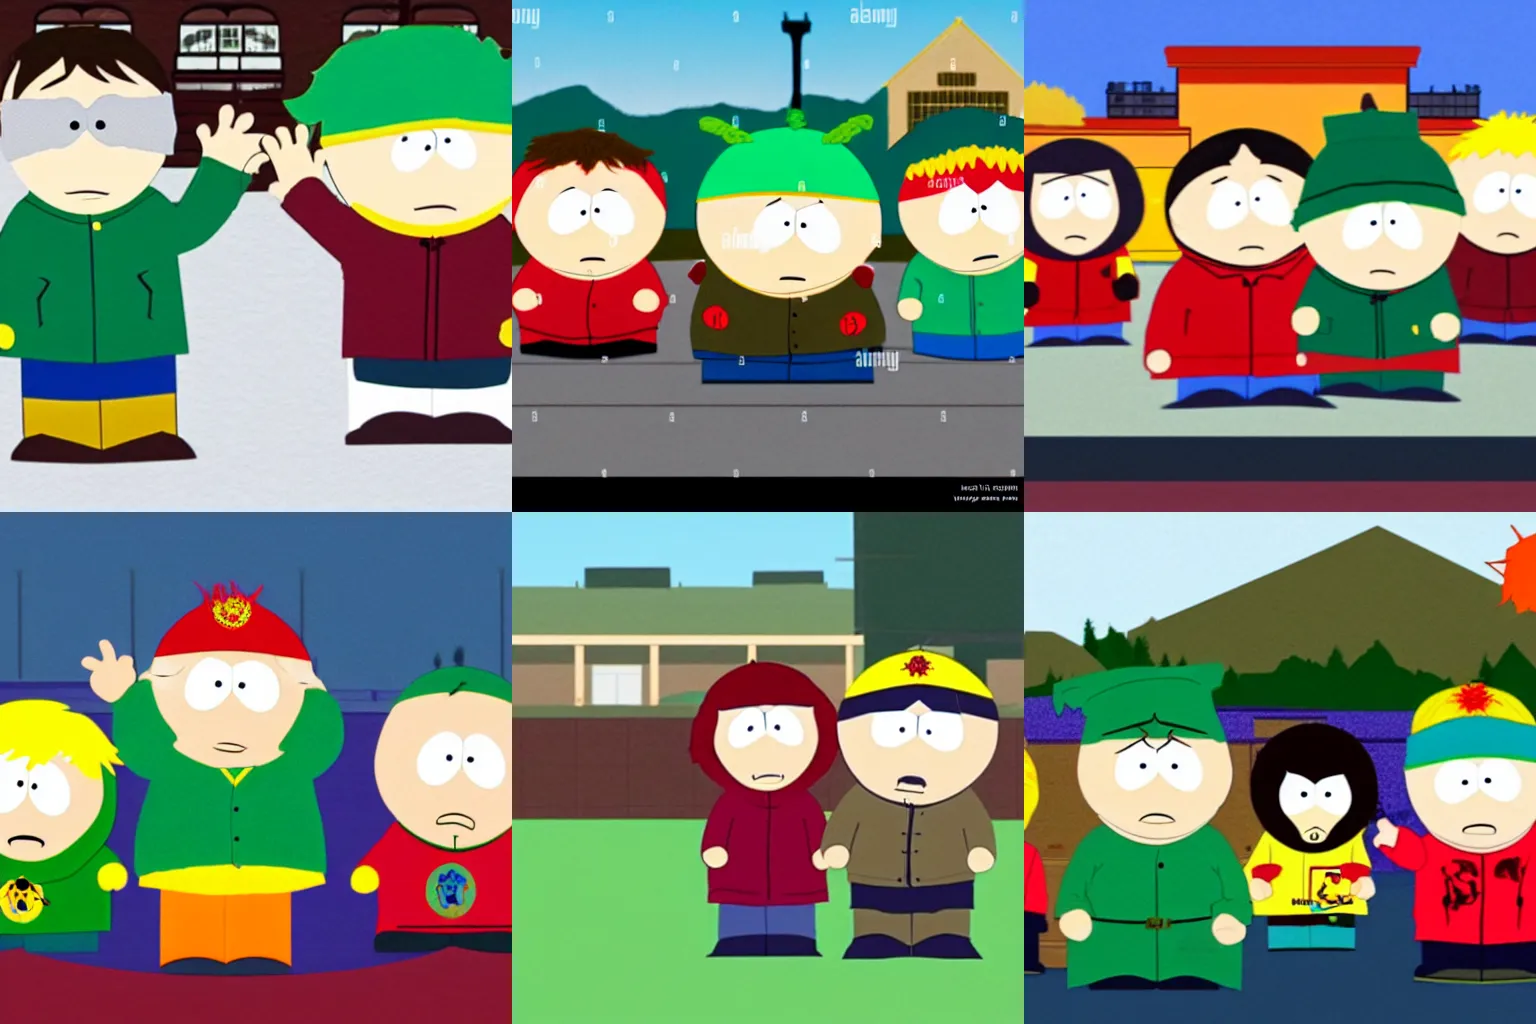 Prompt: Southpark. Satan stands next to Kenny. both are waving and smiling at the camera. school is in the background, it is afternoon, the sun is shining. wide shot.